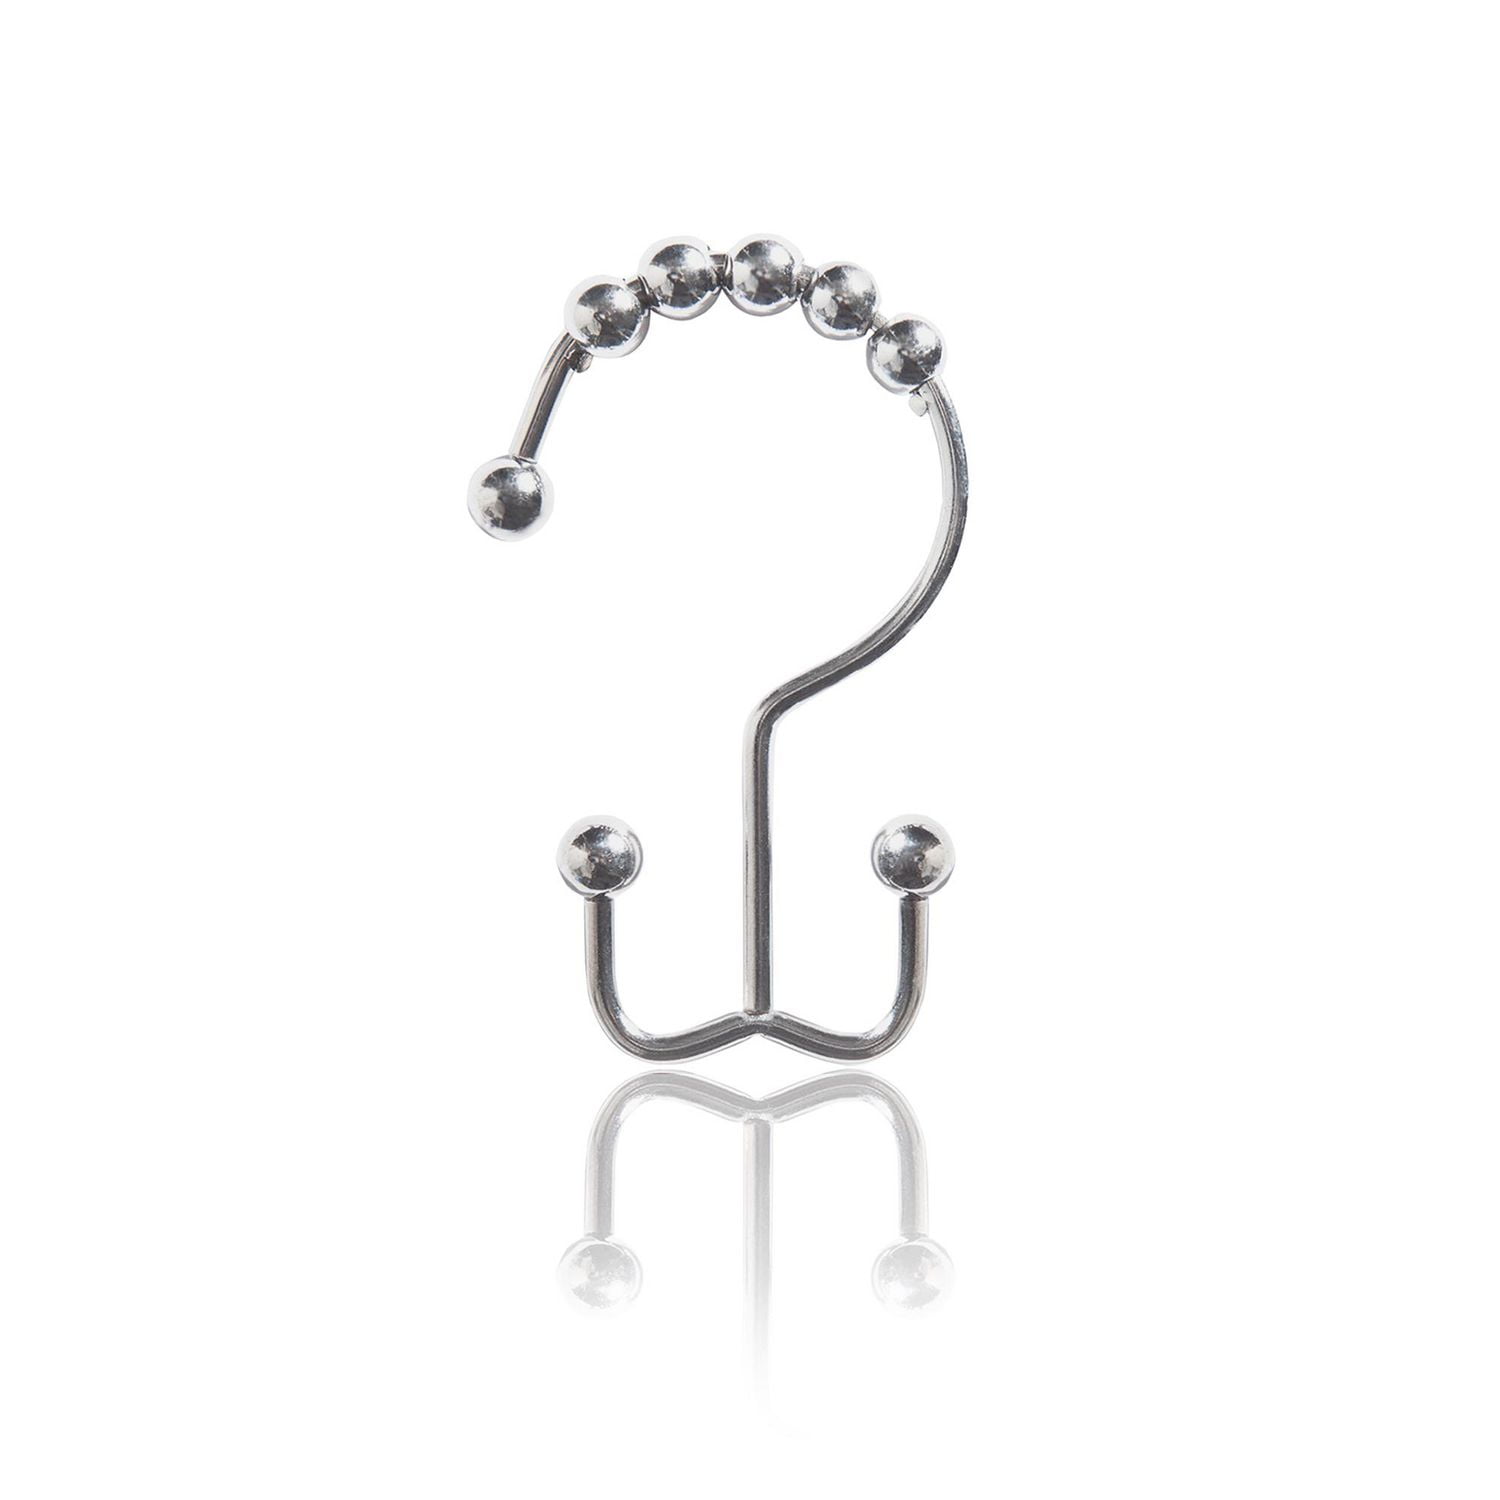 MAINSTAYS Double Roller Glide Shower Curtain Hook Or Ring, Chrome, Double  roller glide hook design 